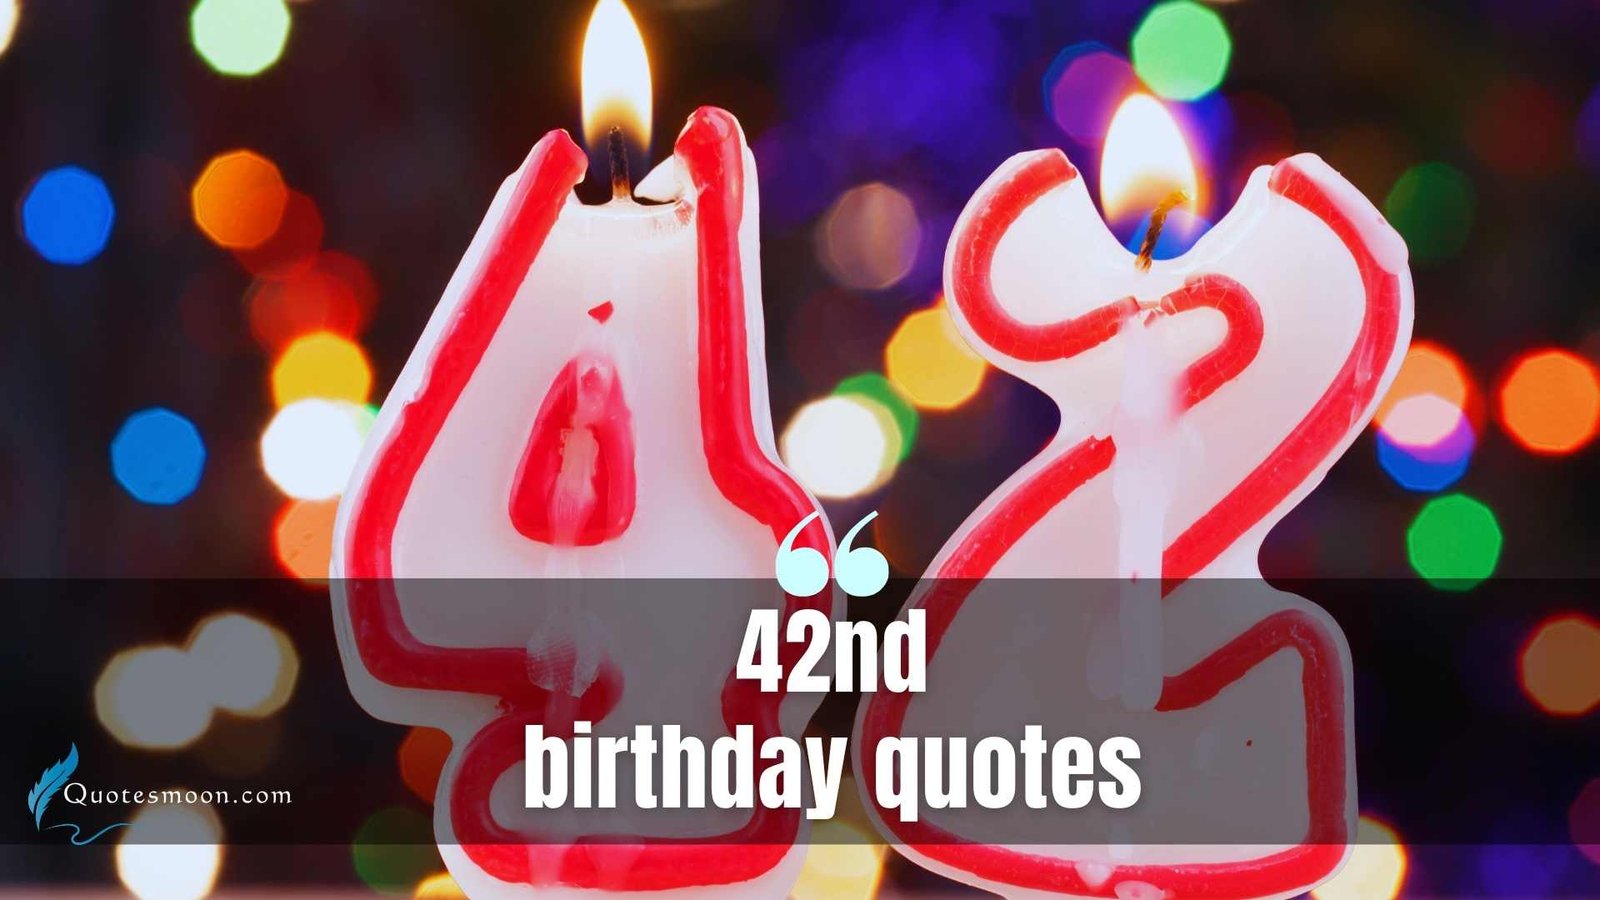 42nd birthday quotes images